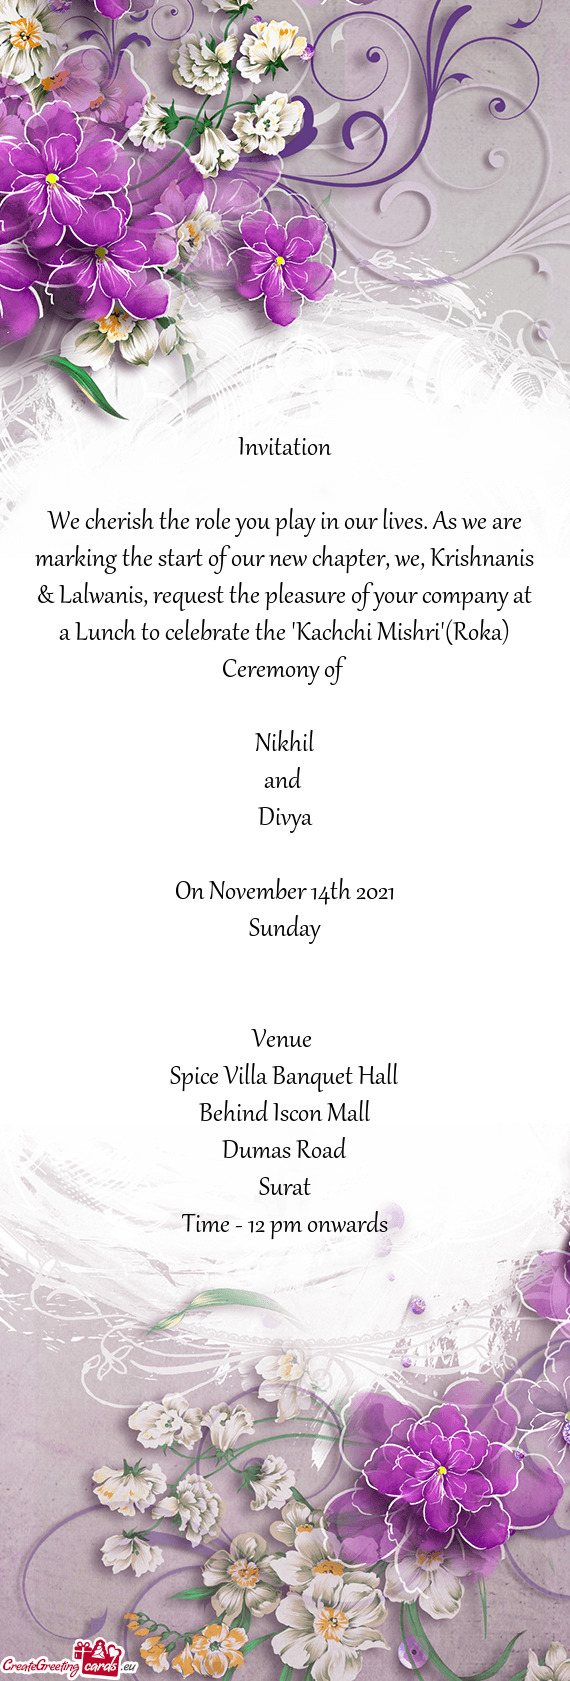 Nanis & Lalwanis, request the pleasure of your company at a Lunch to celebrate the "Kachchi Mishri"(